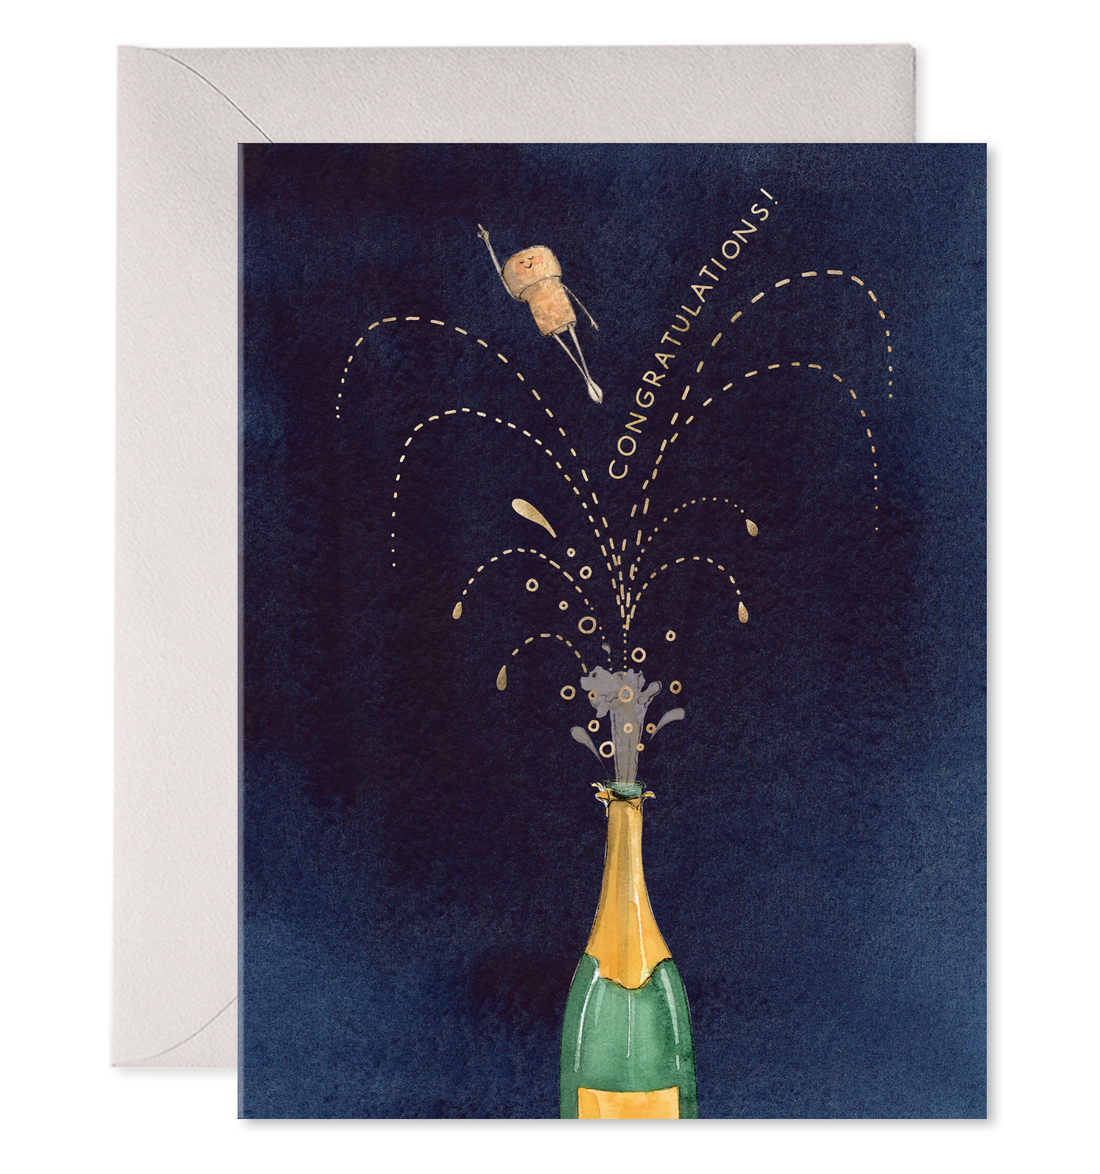 A happy birthday E. Frances Flying Cork Card with a bottle of champagne, crafted on heavyweight paper.